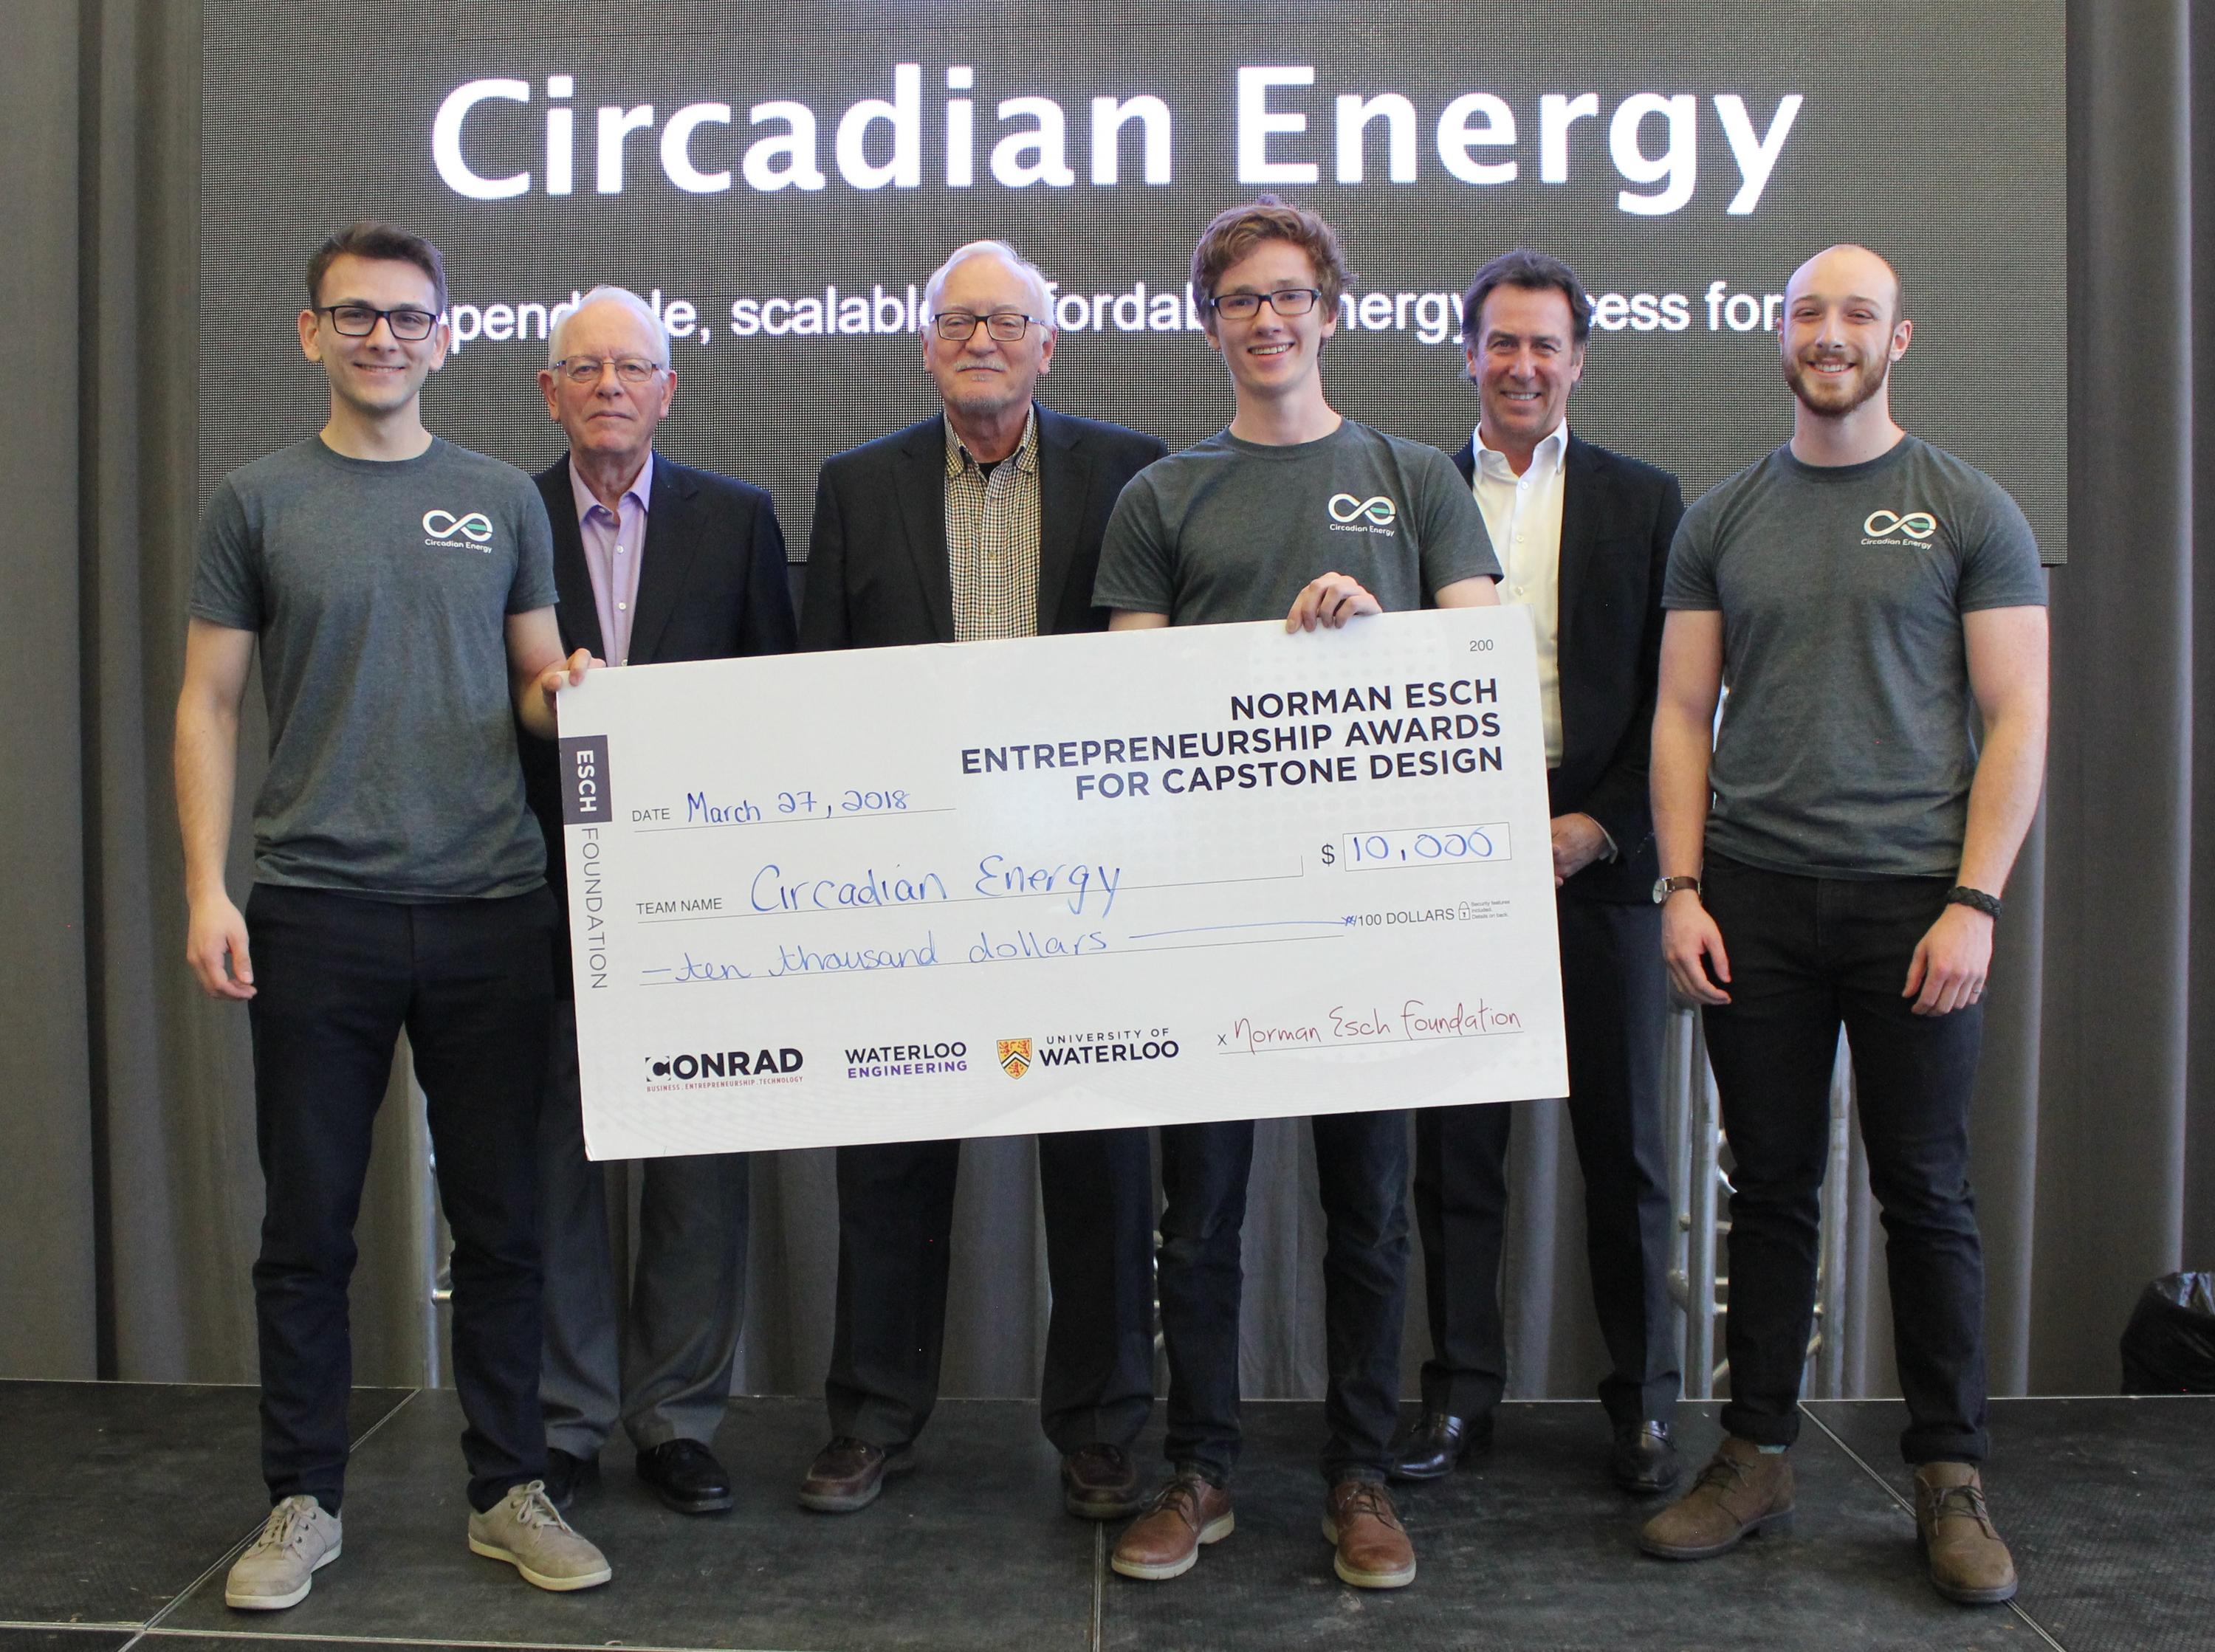 John Curticapean (left to right), Malcolm Williams and Ben Hudson of Circadian Energy pose with Esch Foundation trustees Jim Sharples, David Esch and Larry Barrett at this week's pitch contest for graduating Waterloo Engineering students.